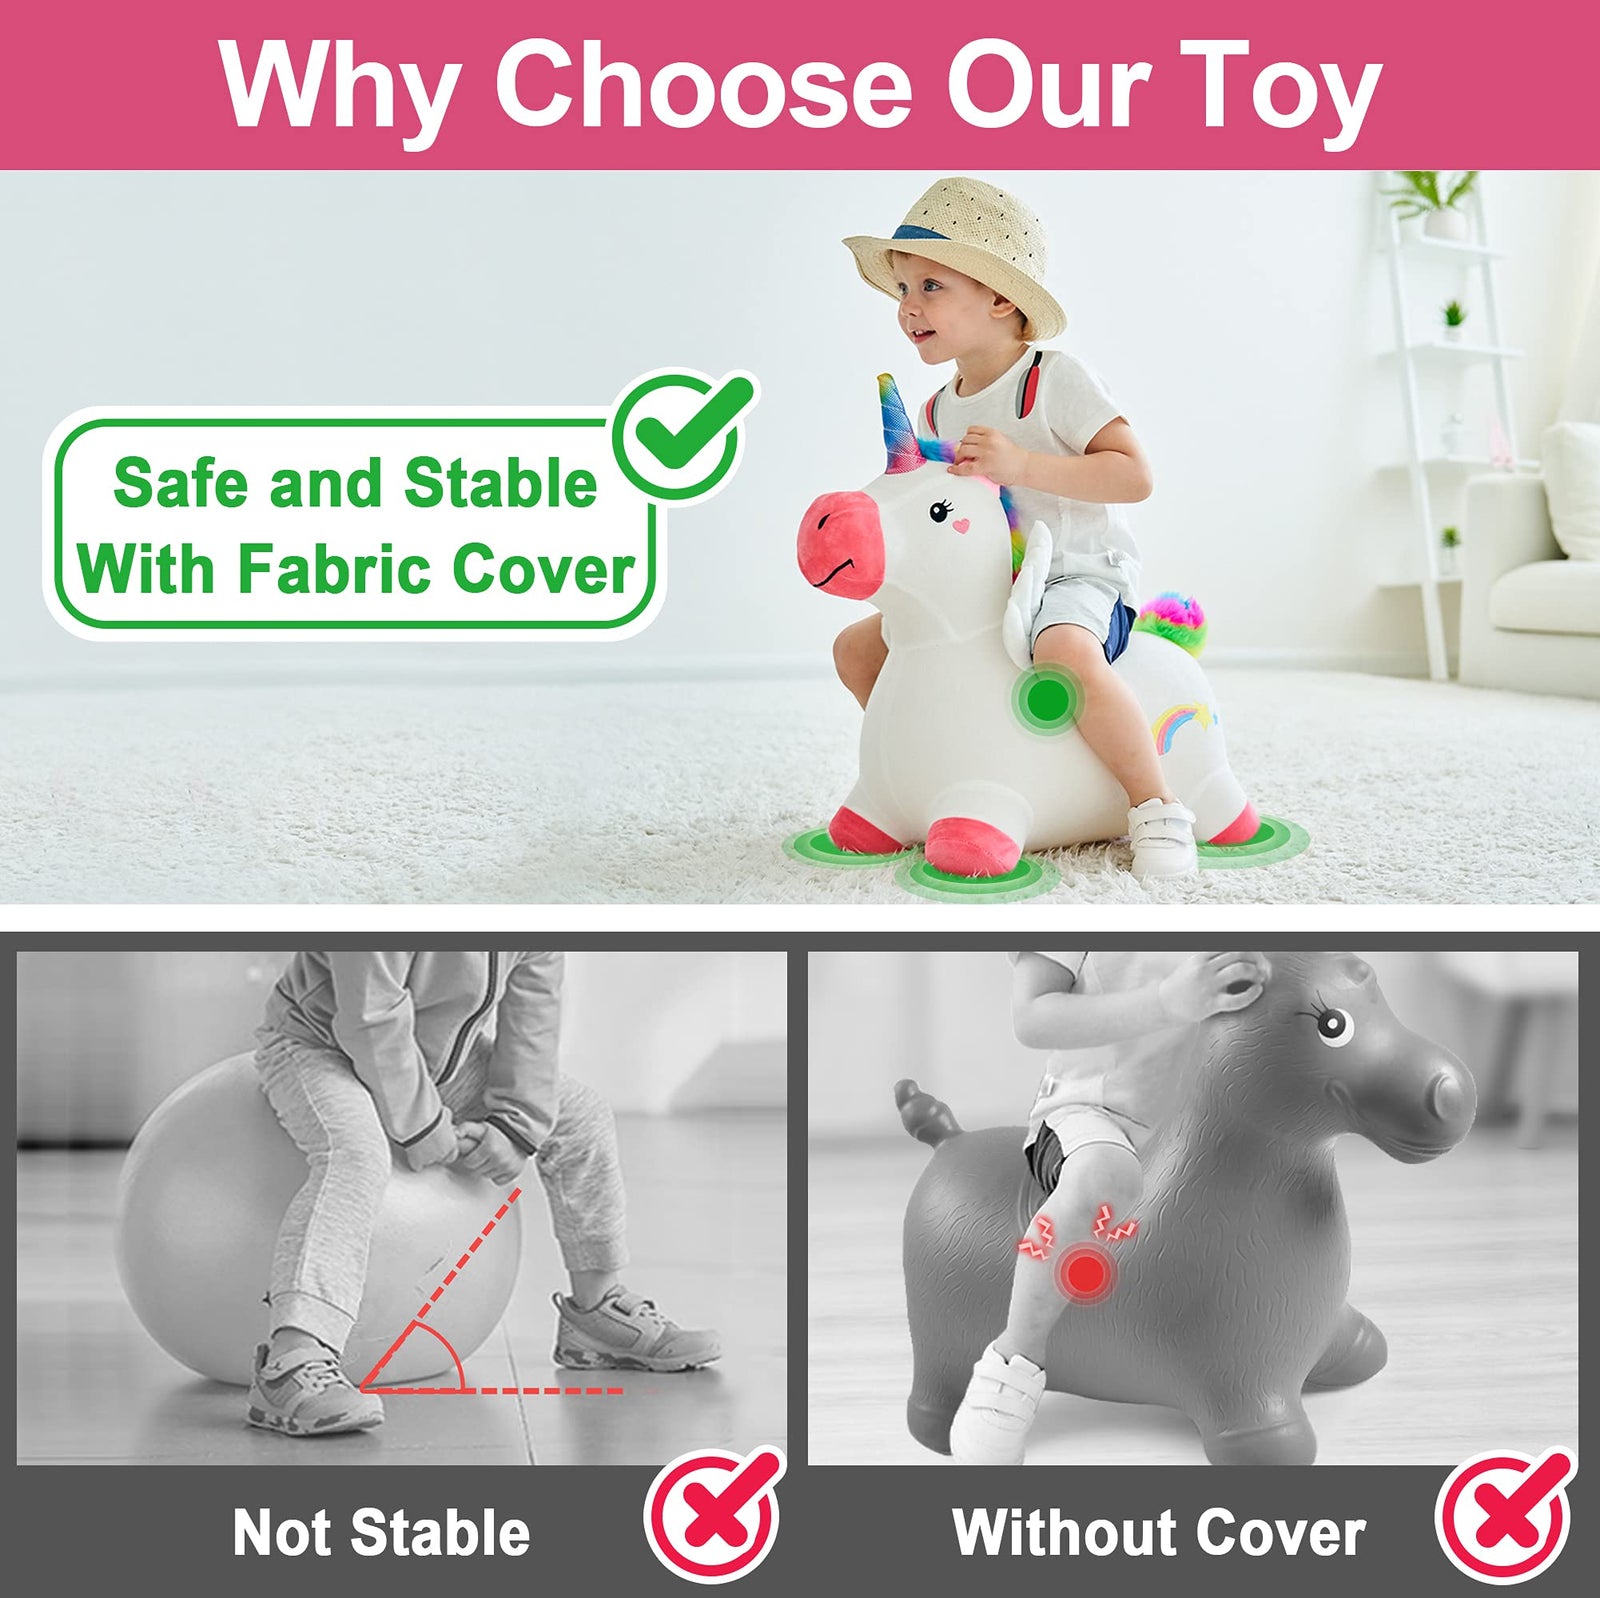 iPlay, iLearn Bouncy Pals Unicorn Hopping Horse Plush, Outdoor n Indoor Ride on Animal Toys, Inflatable Hopper, Activity Riding Birthday Gift for 18 Months 2 3 4 Year Old Kid Toddler Girl W/ Pump